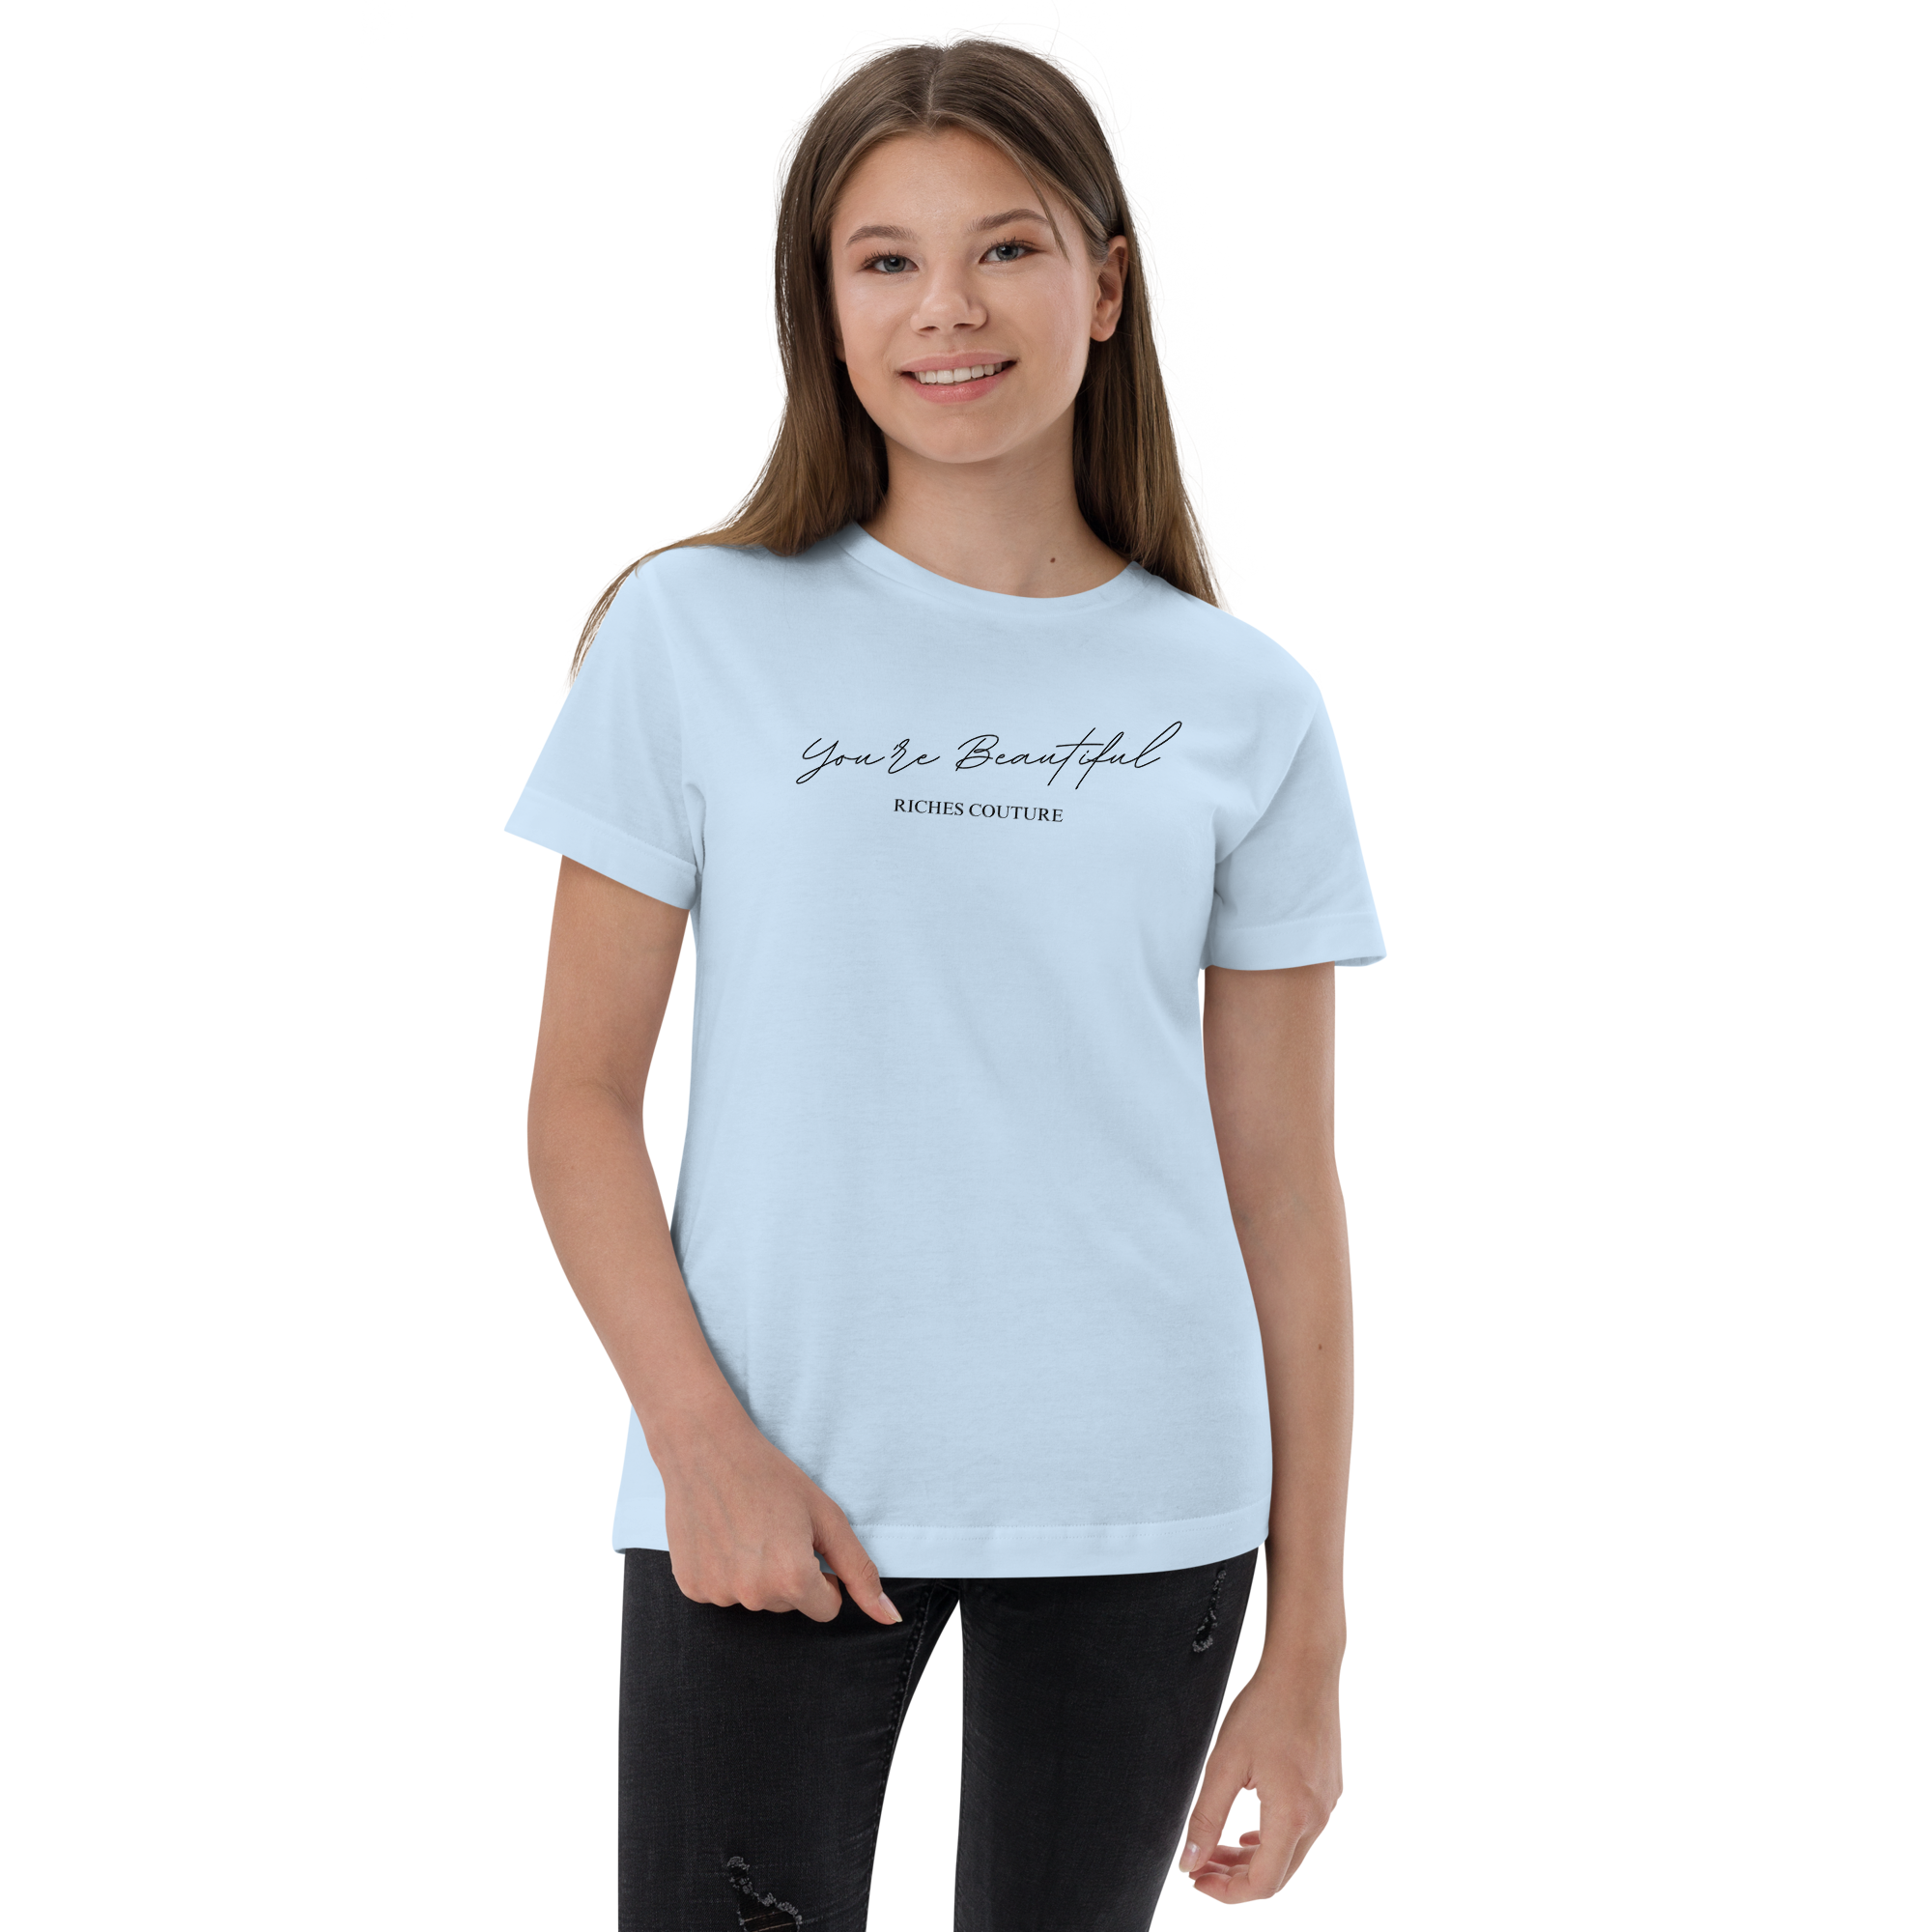 Riches Couture classic youth jersey t-shirt is soft and comfy light blue